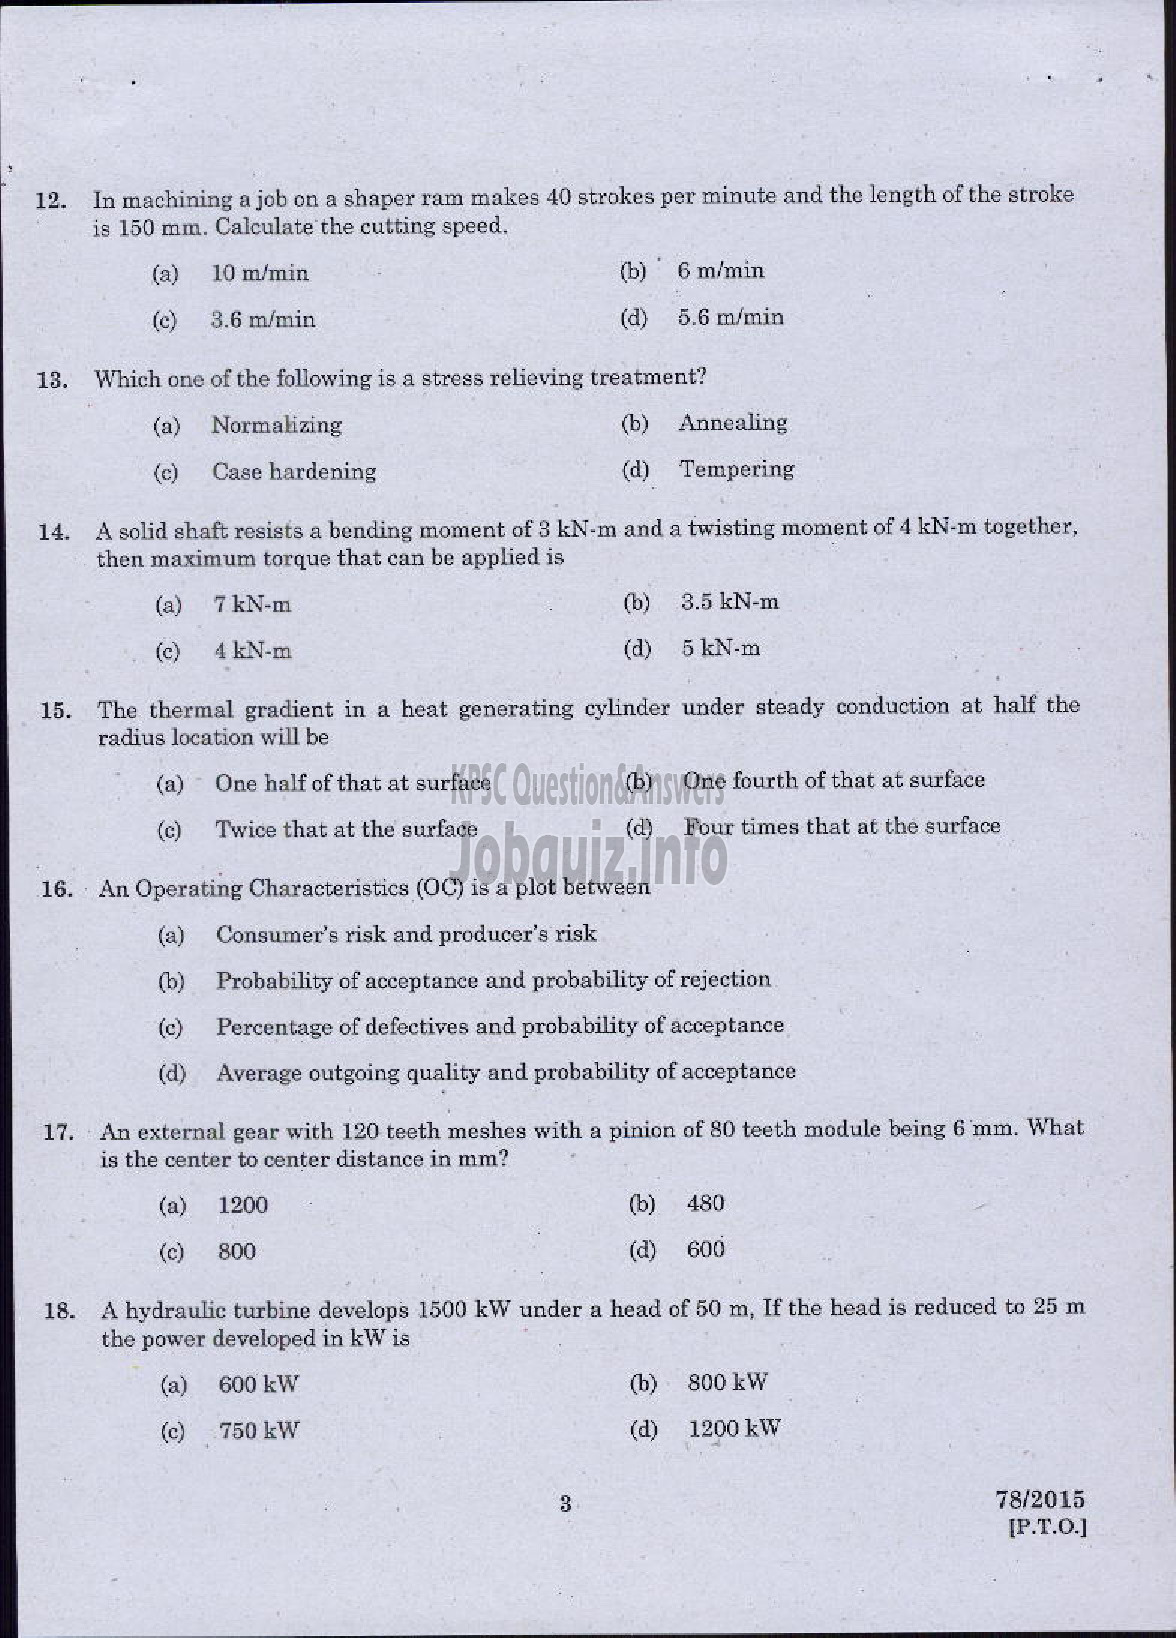 Kerala PSC Question Paper - MECHANICAL ENGINEERING-4